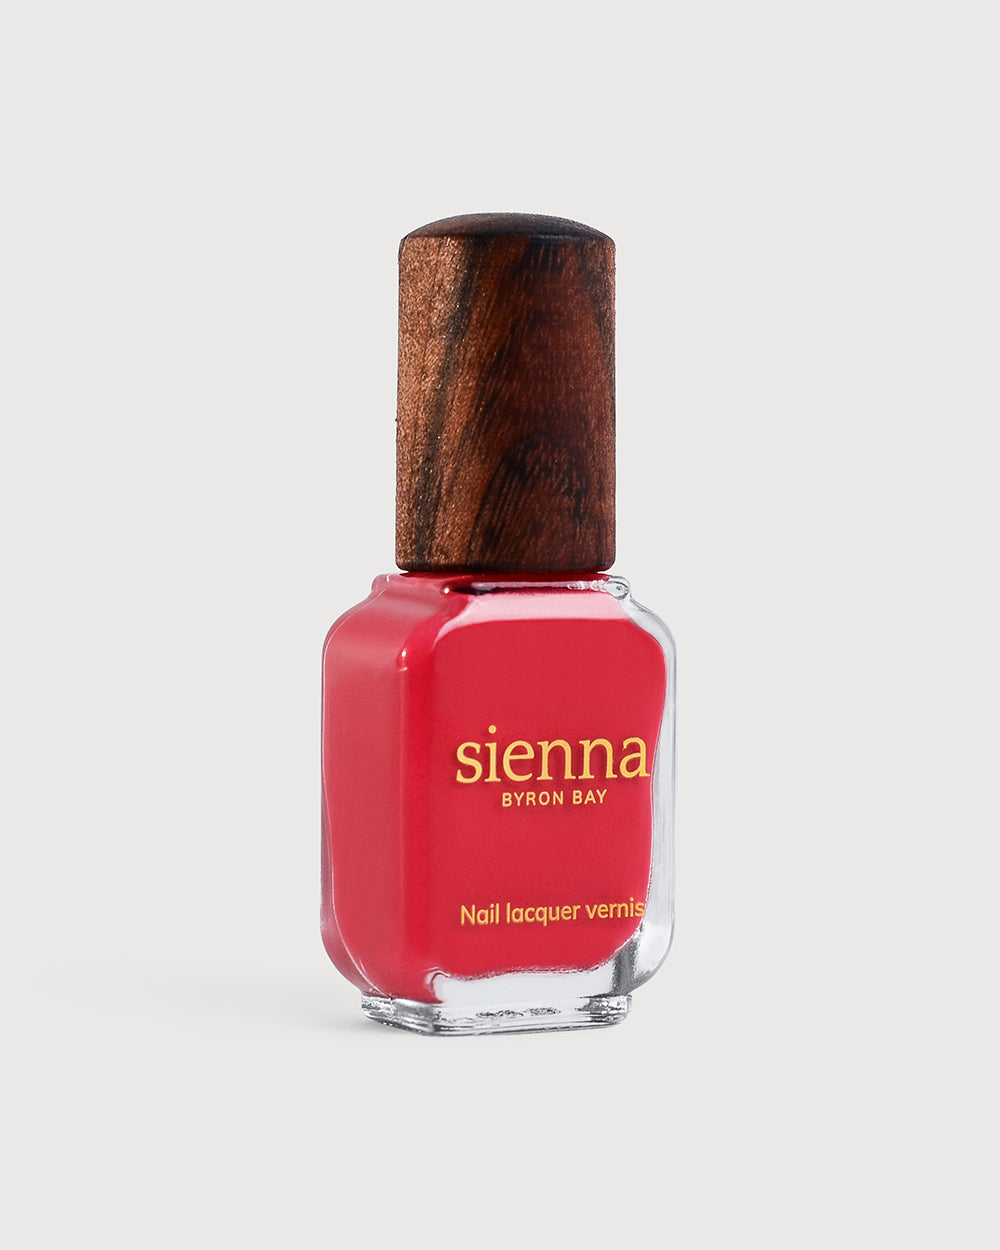 Bright Pink nail polish bottle with timber cap by Sienna Byron Bay